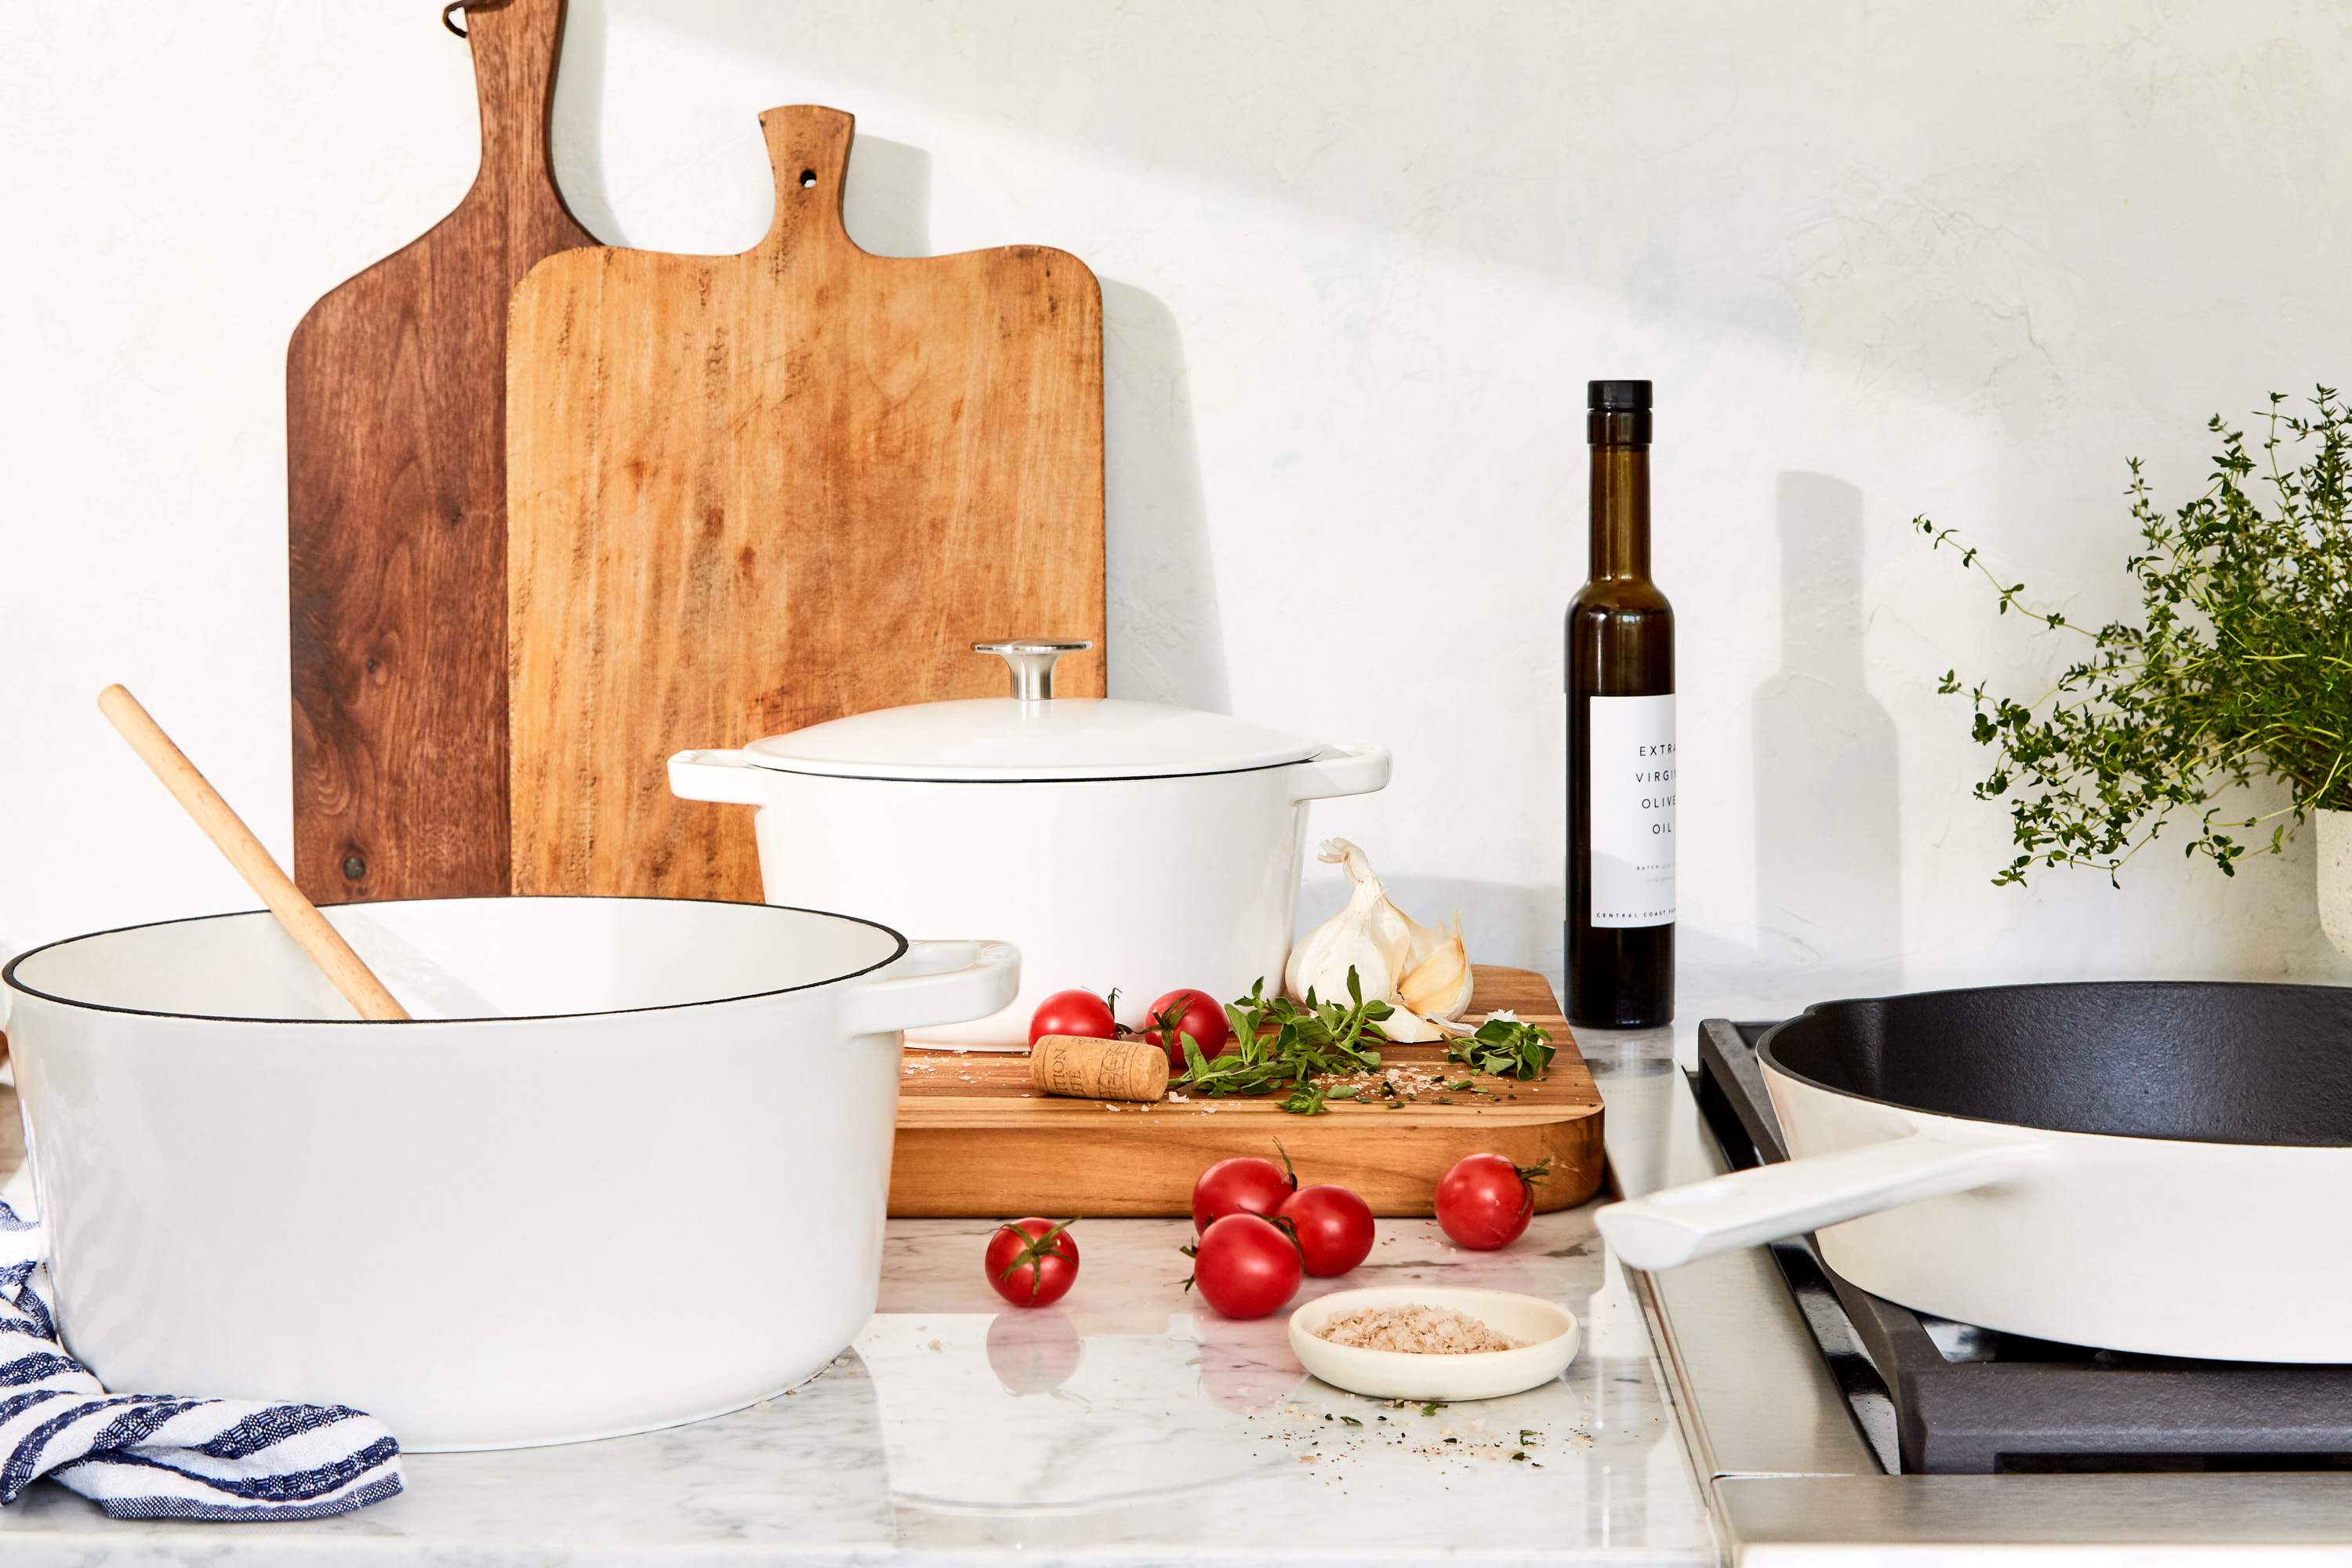 Why DTC cookware brands like Great Jones, Our Place, and East Fork